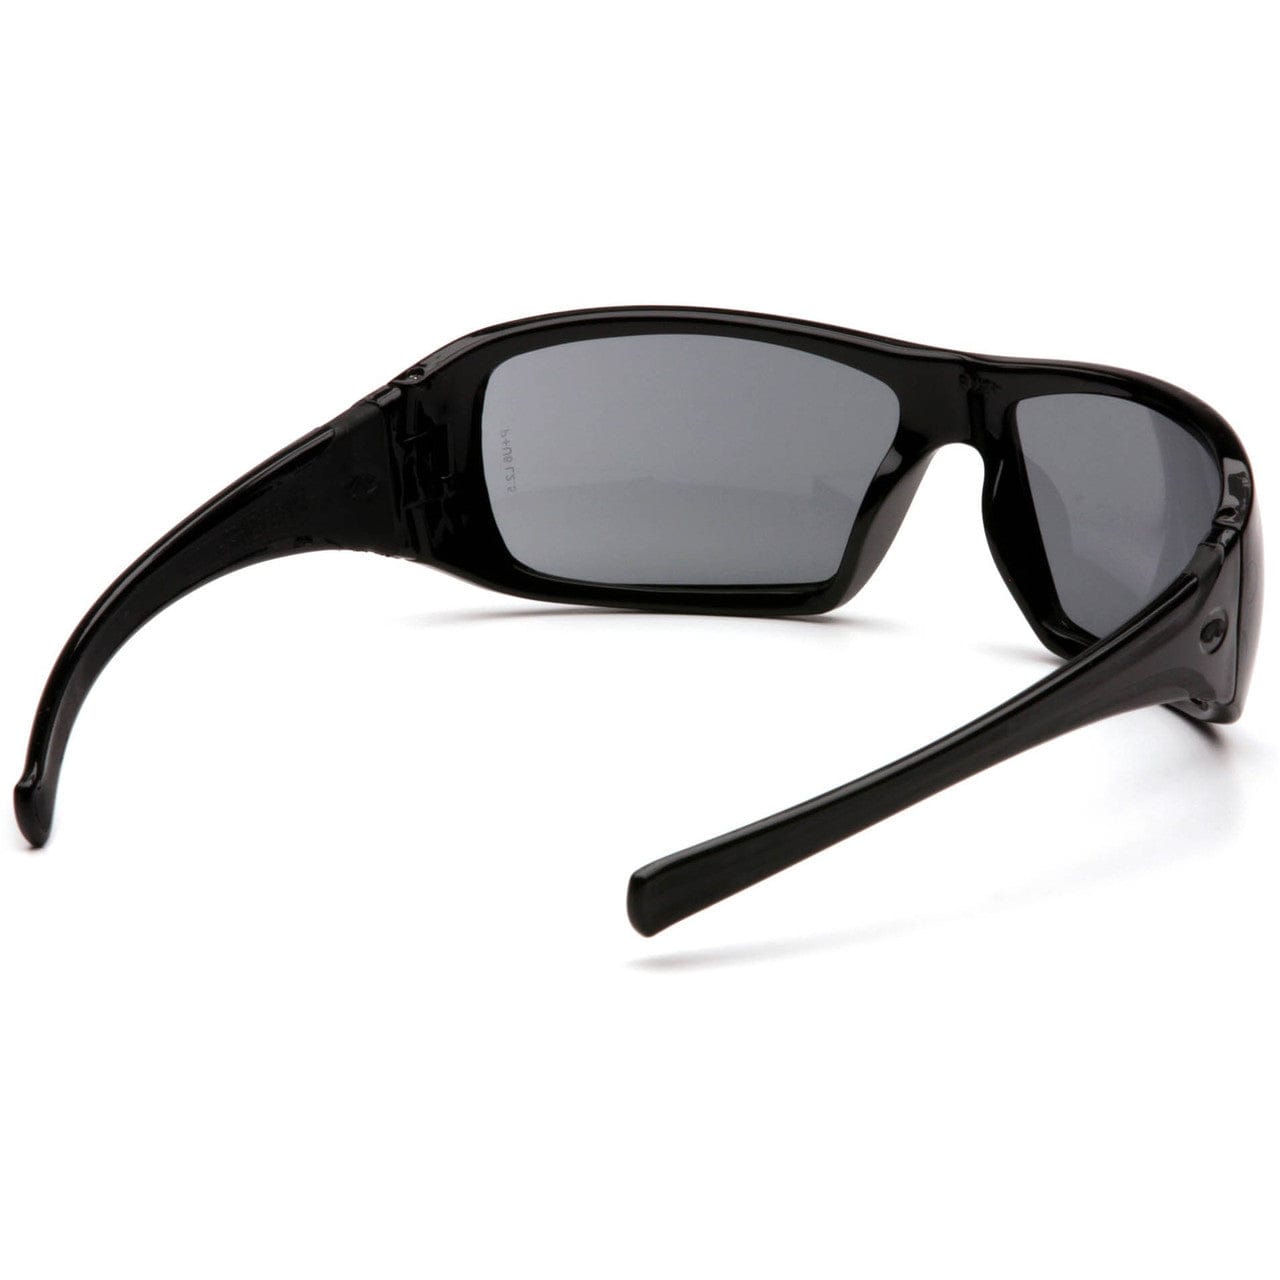 Pyramex Goliath Safety Glasses with Black Frame and Gray Lens SB5620D Inside View